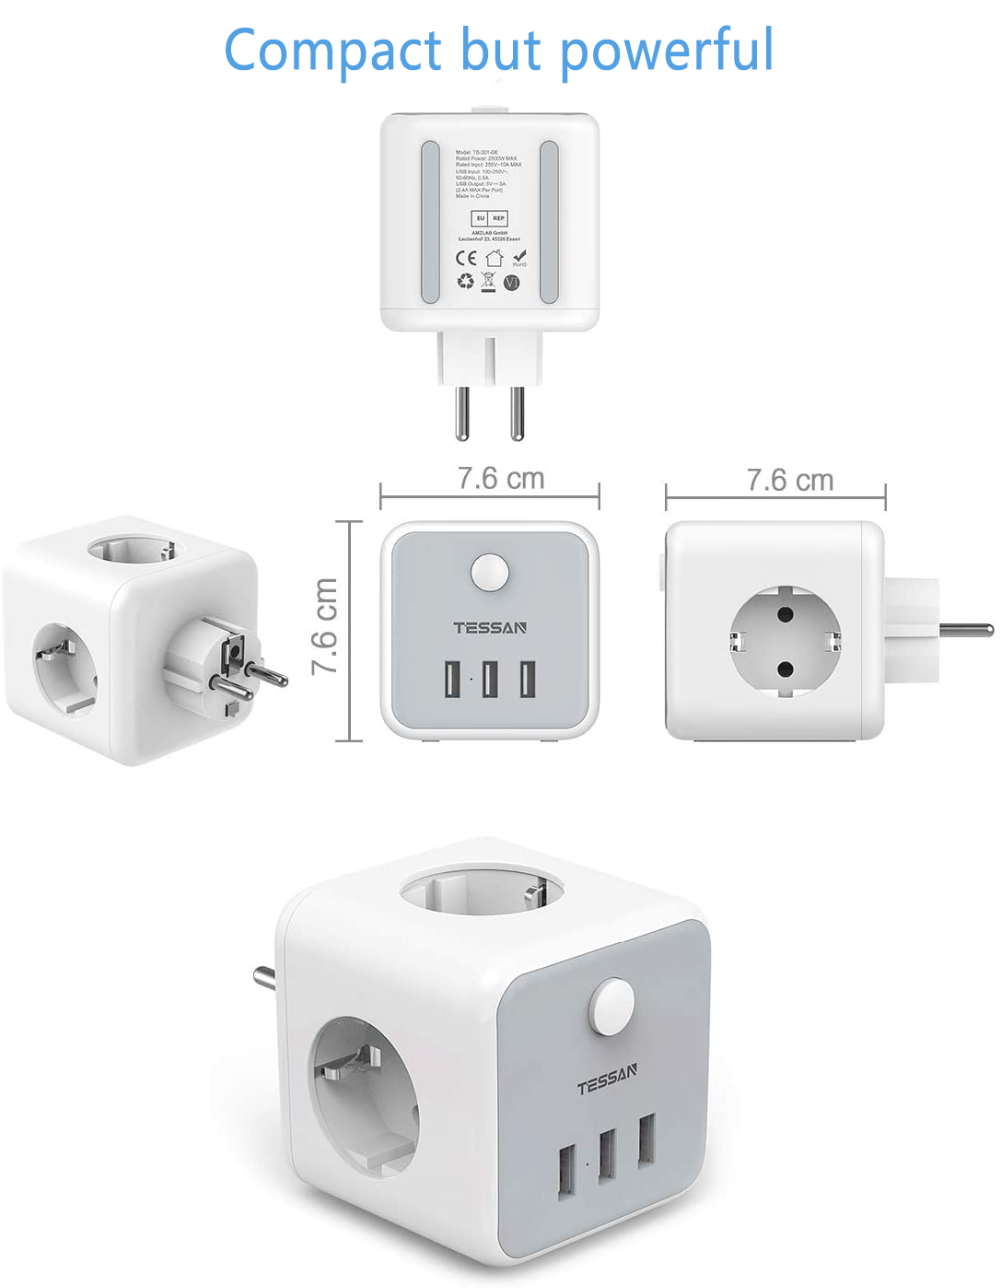 TESSAN-TS-301-DE-2500W-6-in-1-GermanEU-Wall-Socket-Power-Strip-with-3-AC-Outlets3-USB-Charger-Adapte-1823342-7